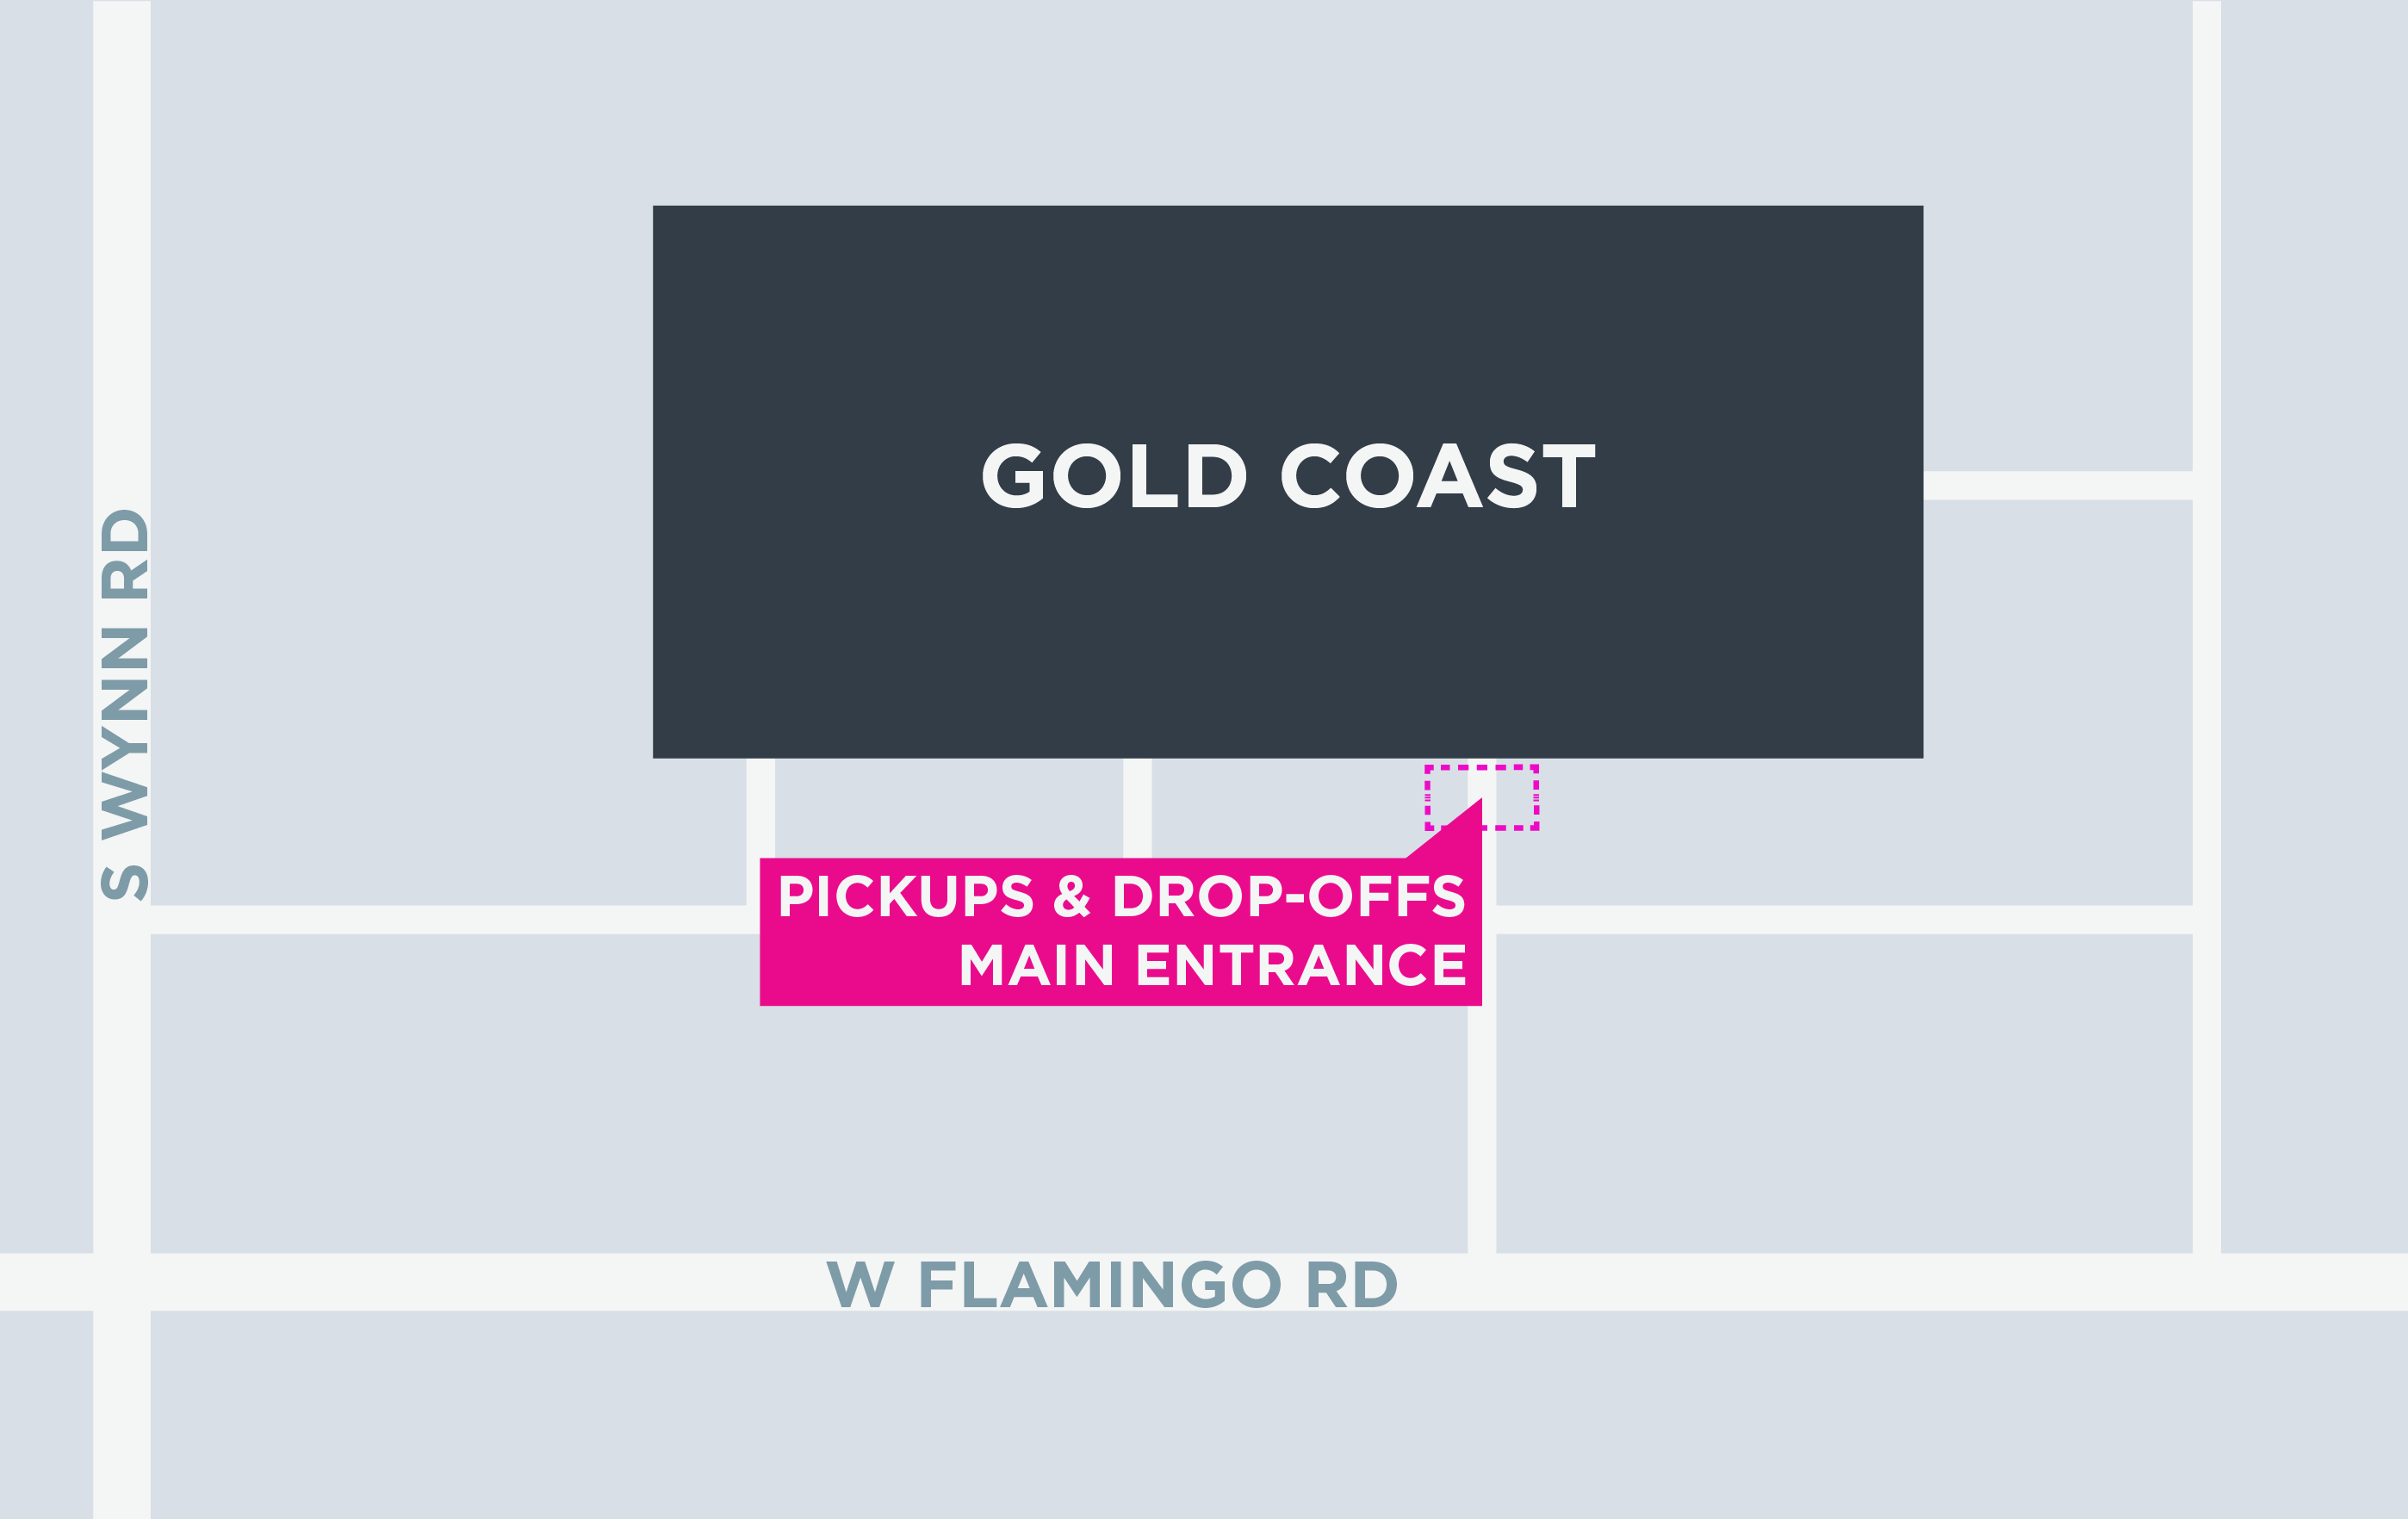 Map of the pickup and drop-off area at the Gold Coast in Las Vegas.